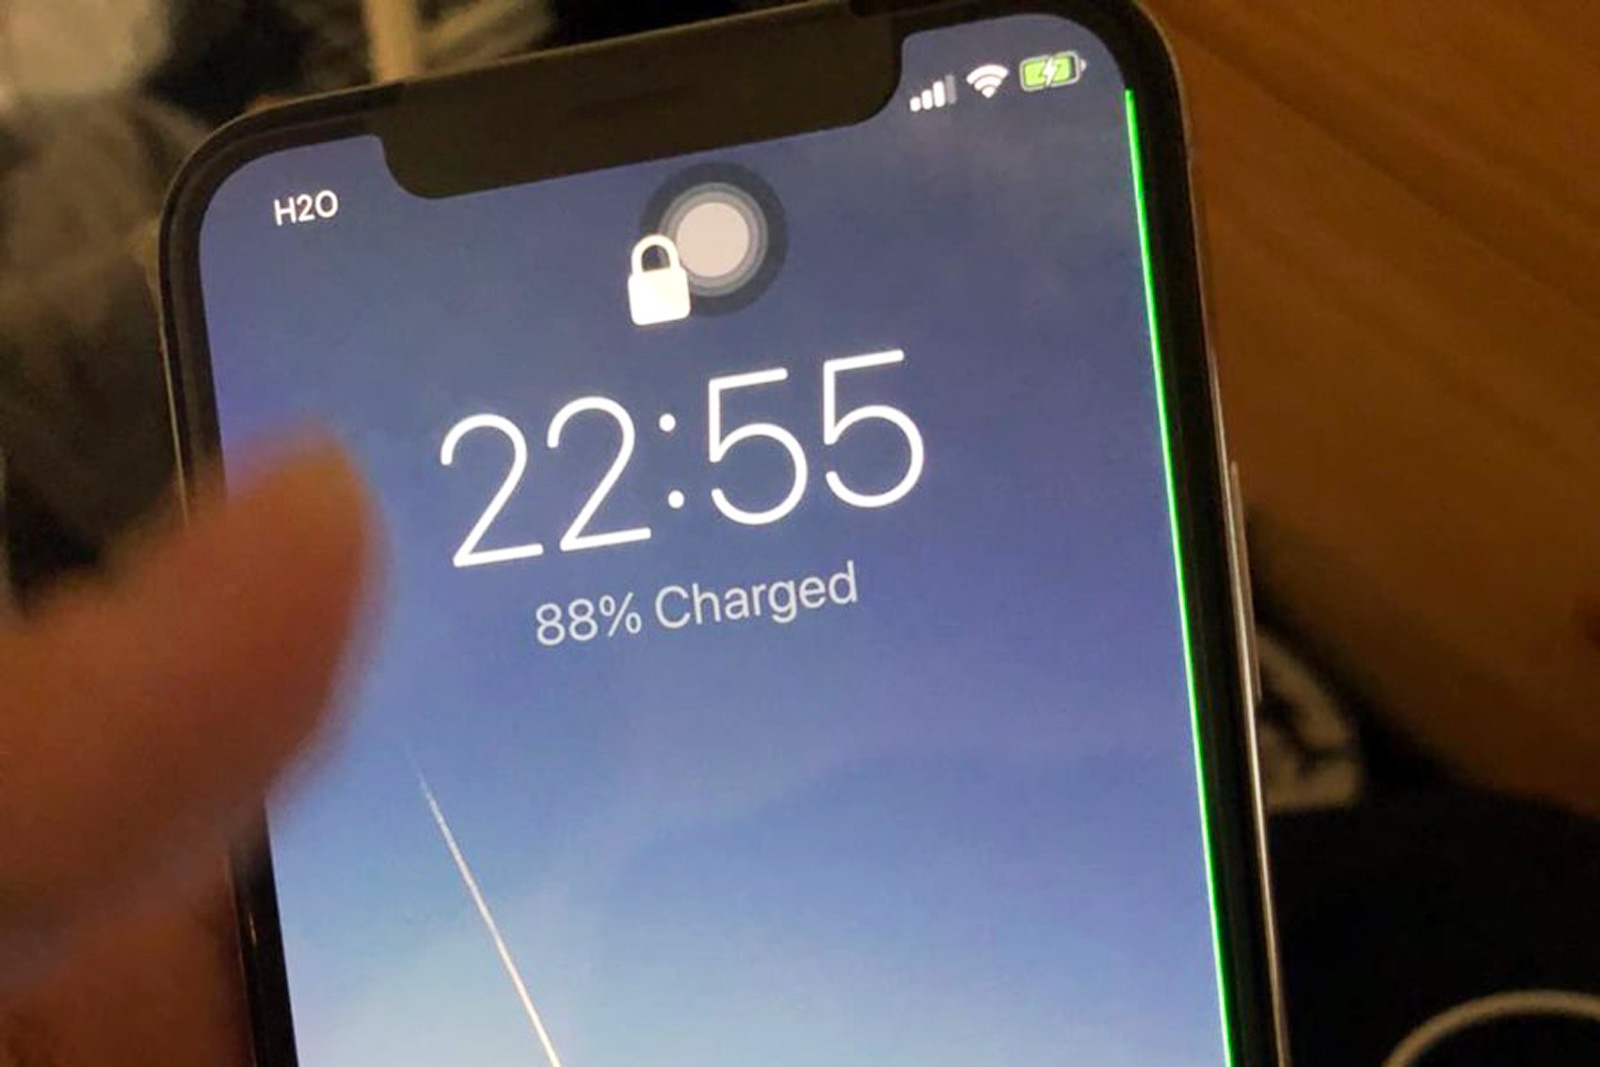 Some iPhone X displays have a nasty green line